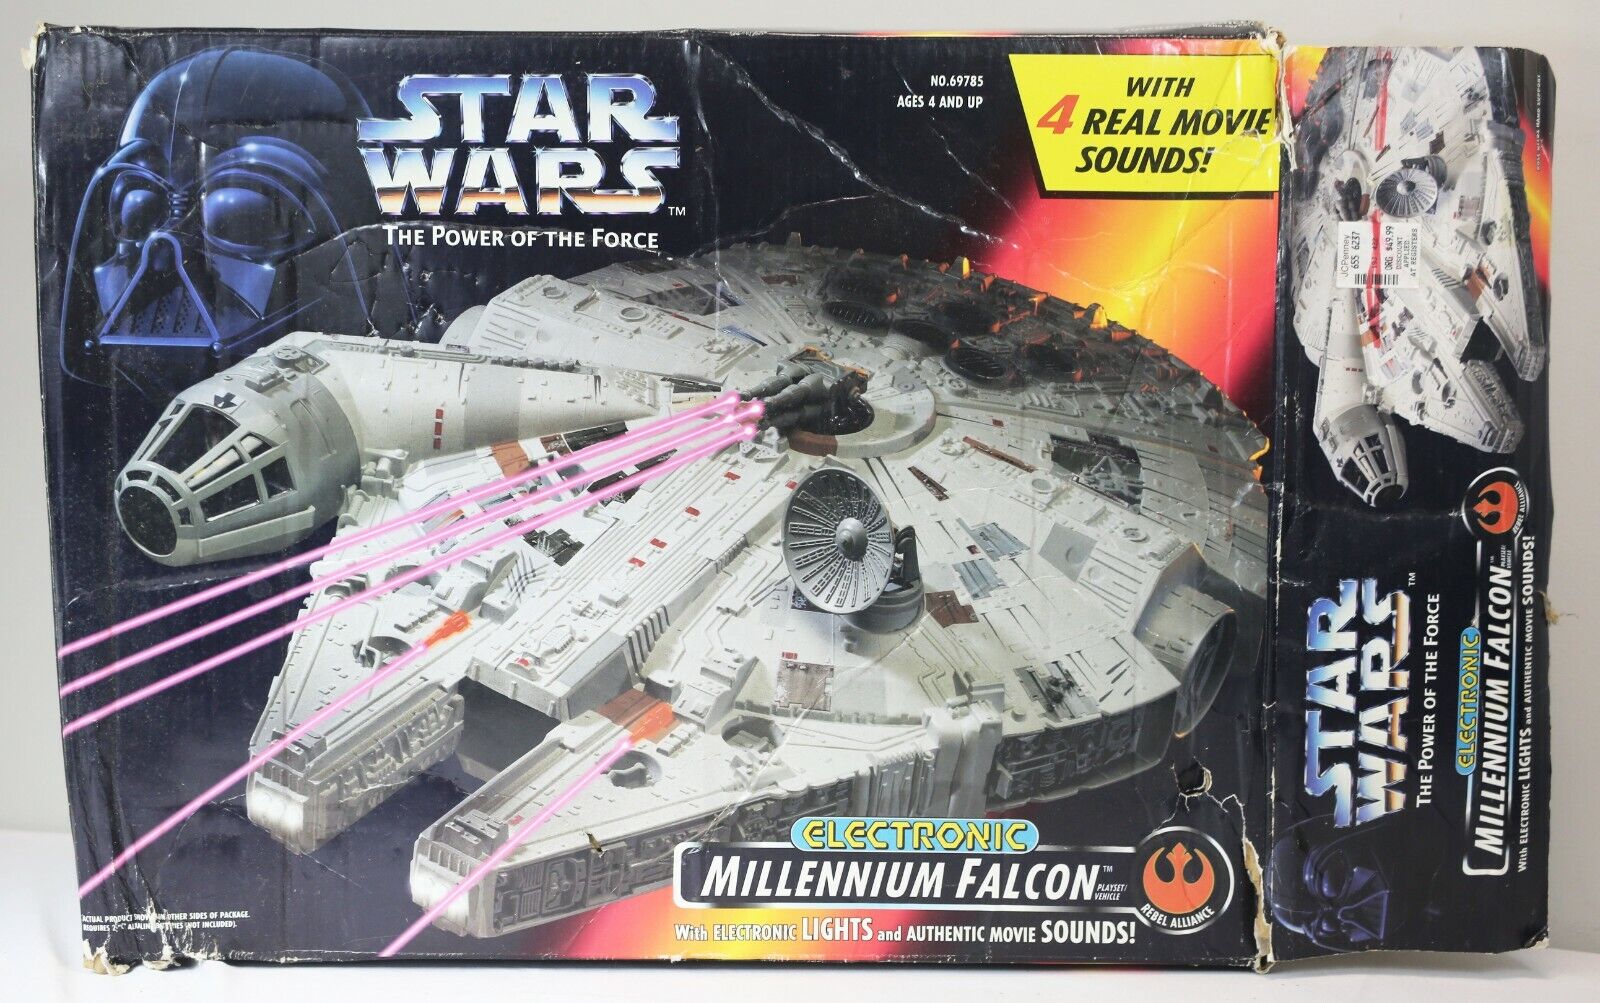 VINTAGE 1995 Kenner Star Wars Power of the Force Electronic Millennium Falcon